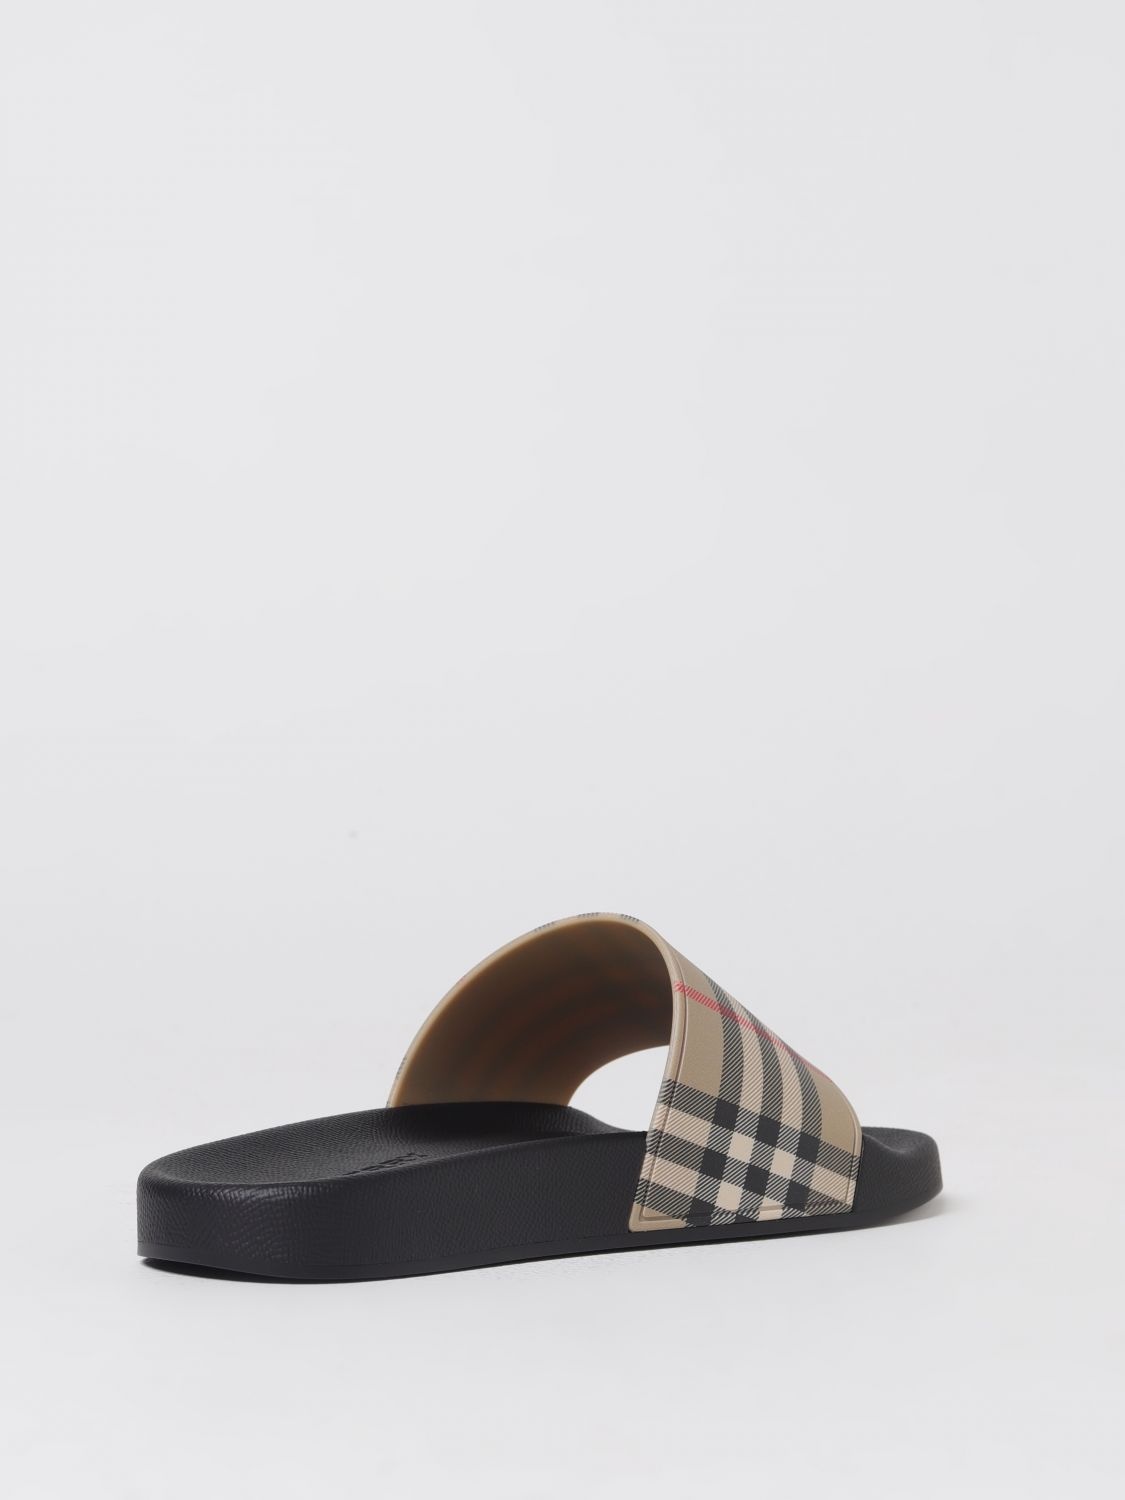 Burberry slides in rubber - 3